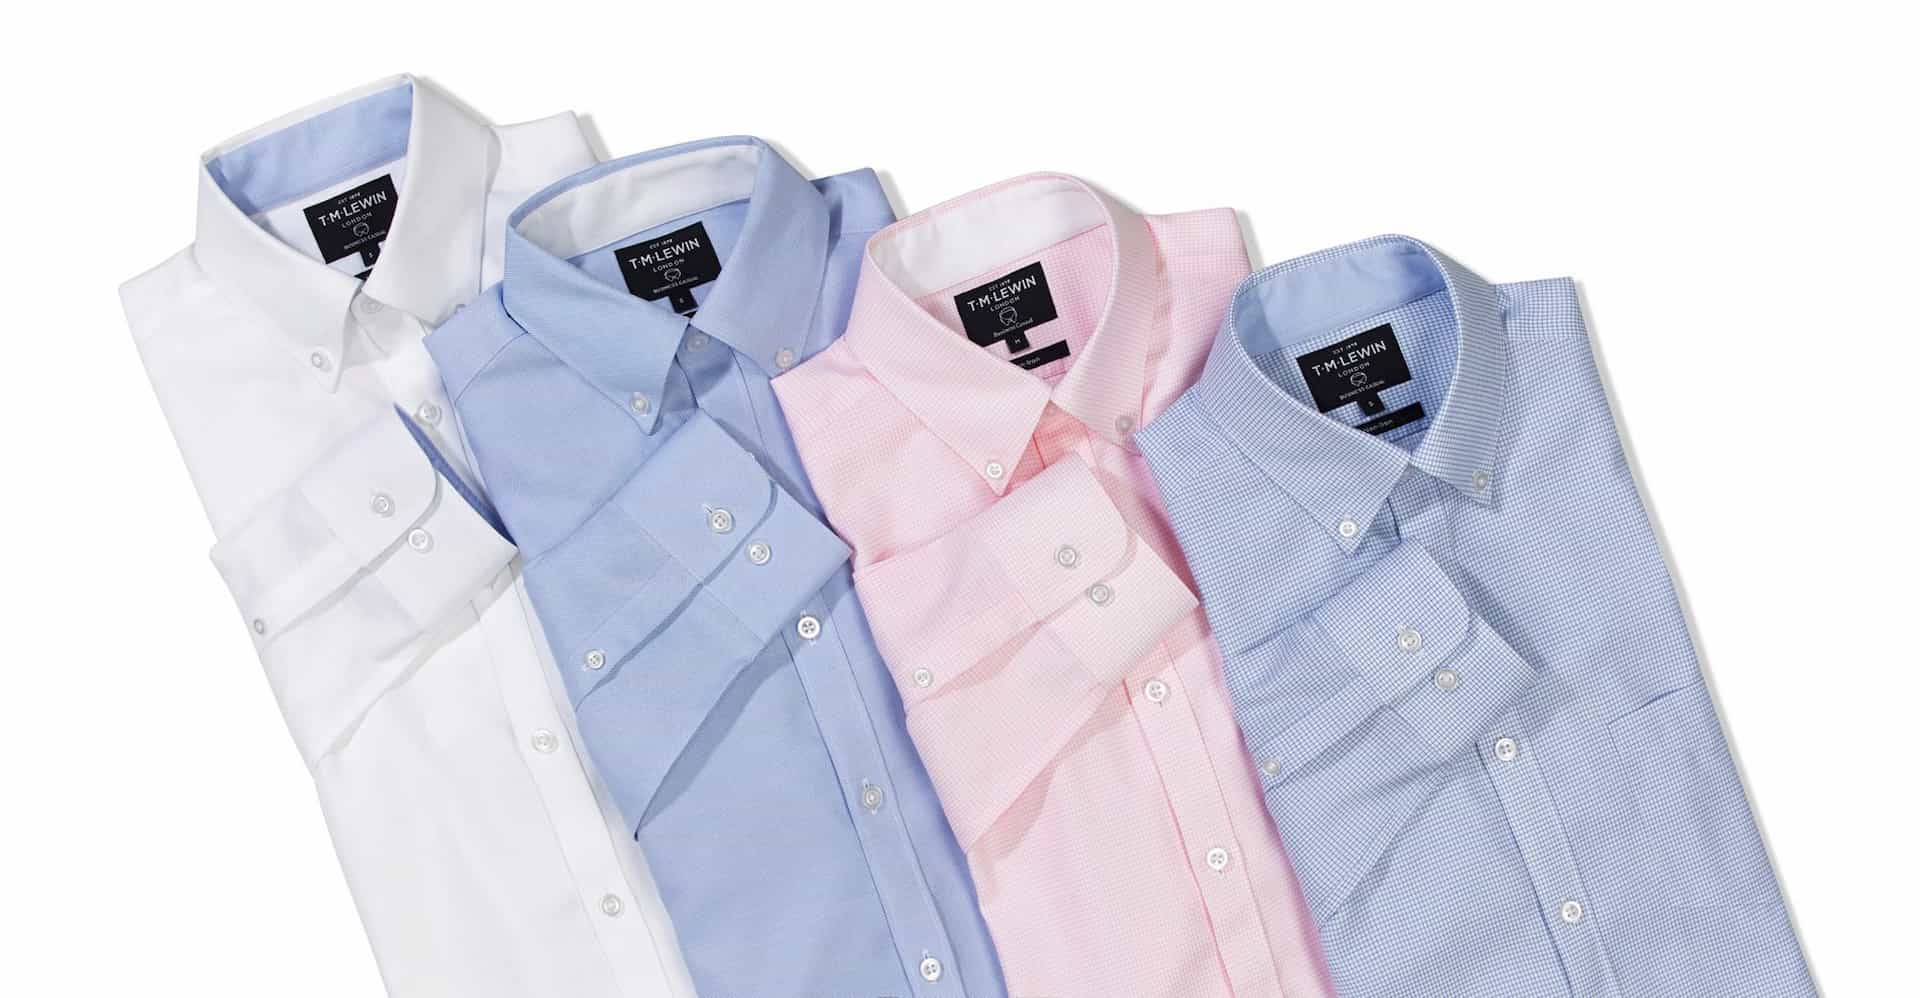 TM Lewin Shirts from $24. Clearance sale on now